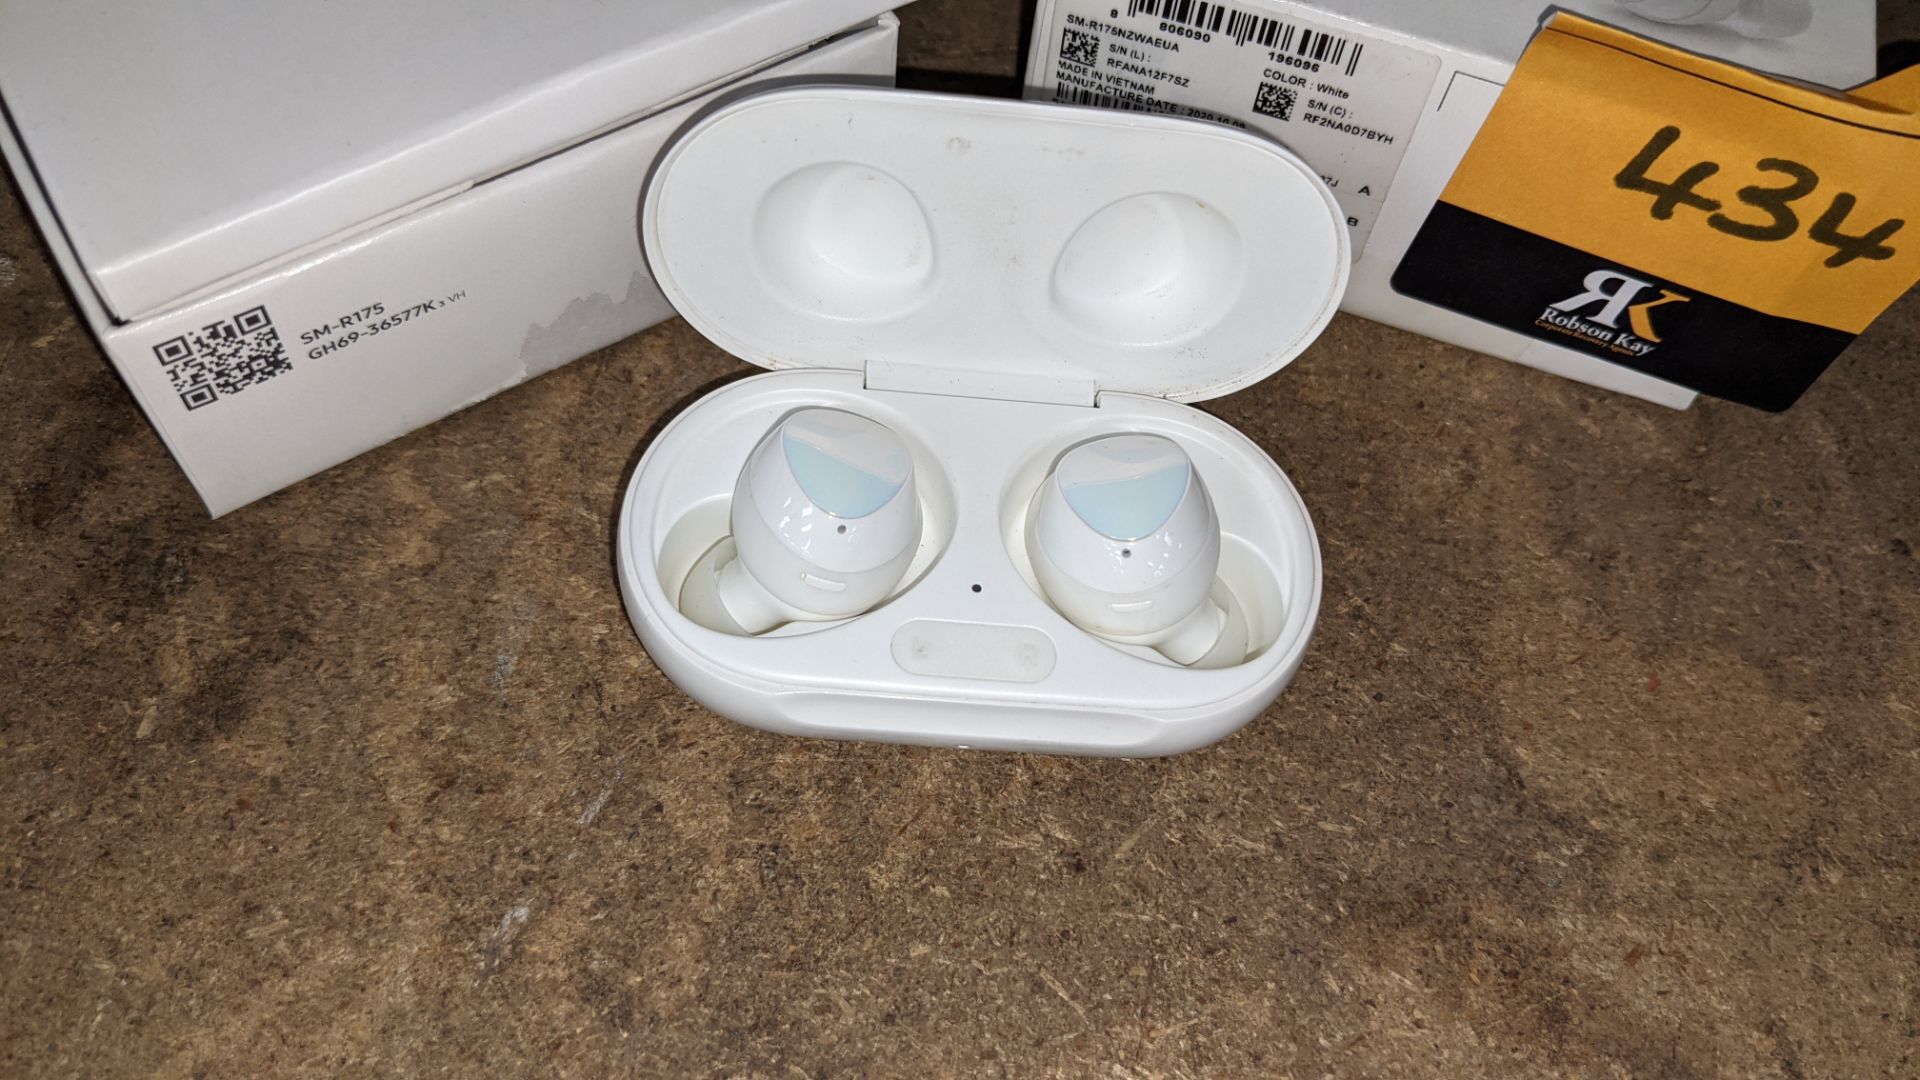 Samsung Galaxy Buds+ wireless earphones including wireless charging case, box & book pack. NB Water - Image 3 of 16